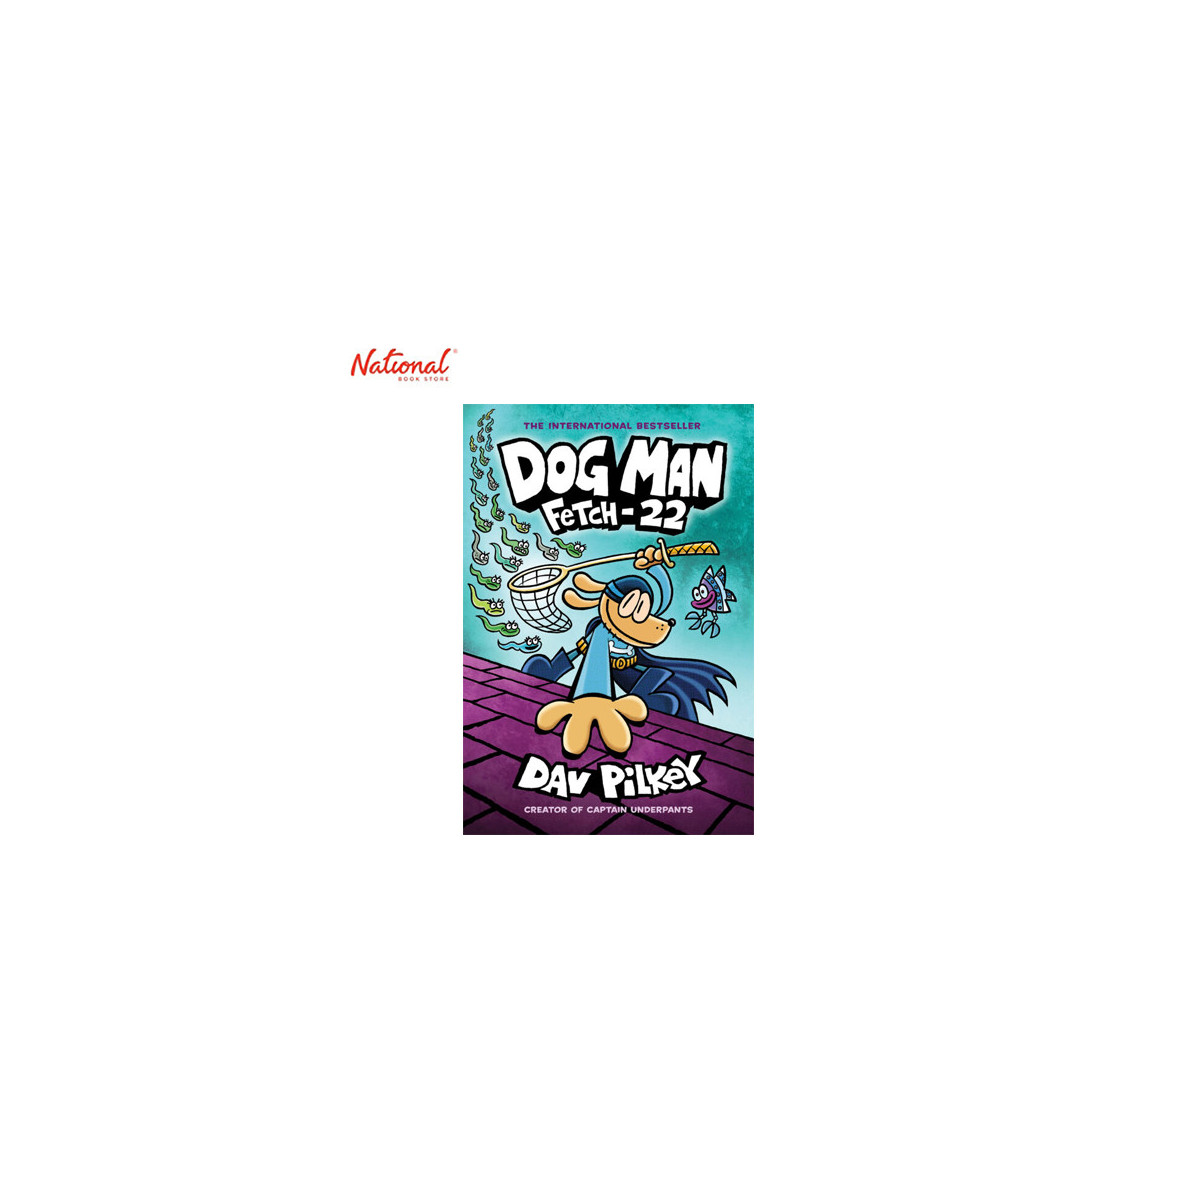 Dog Man: Fetched-22: From the Creator of Captain Underpants Trade Paperback by Dav Pilkey